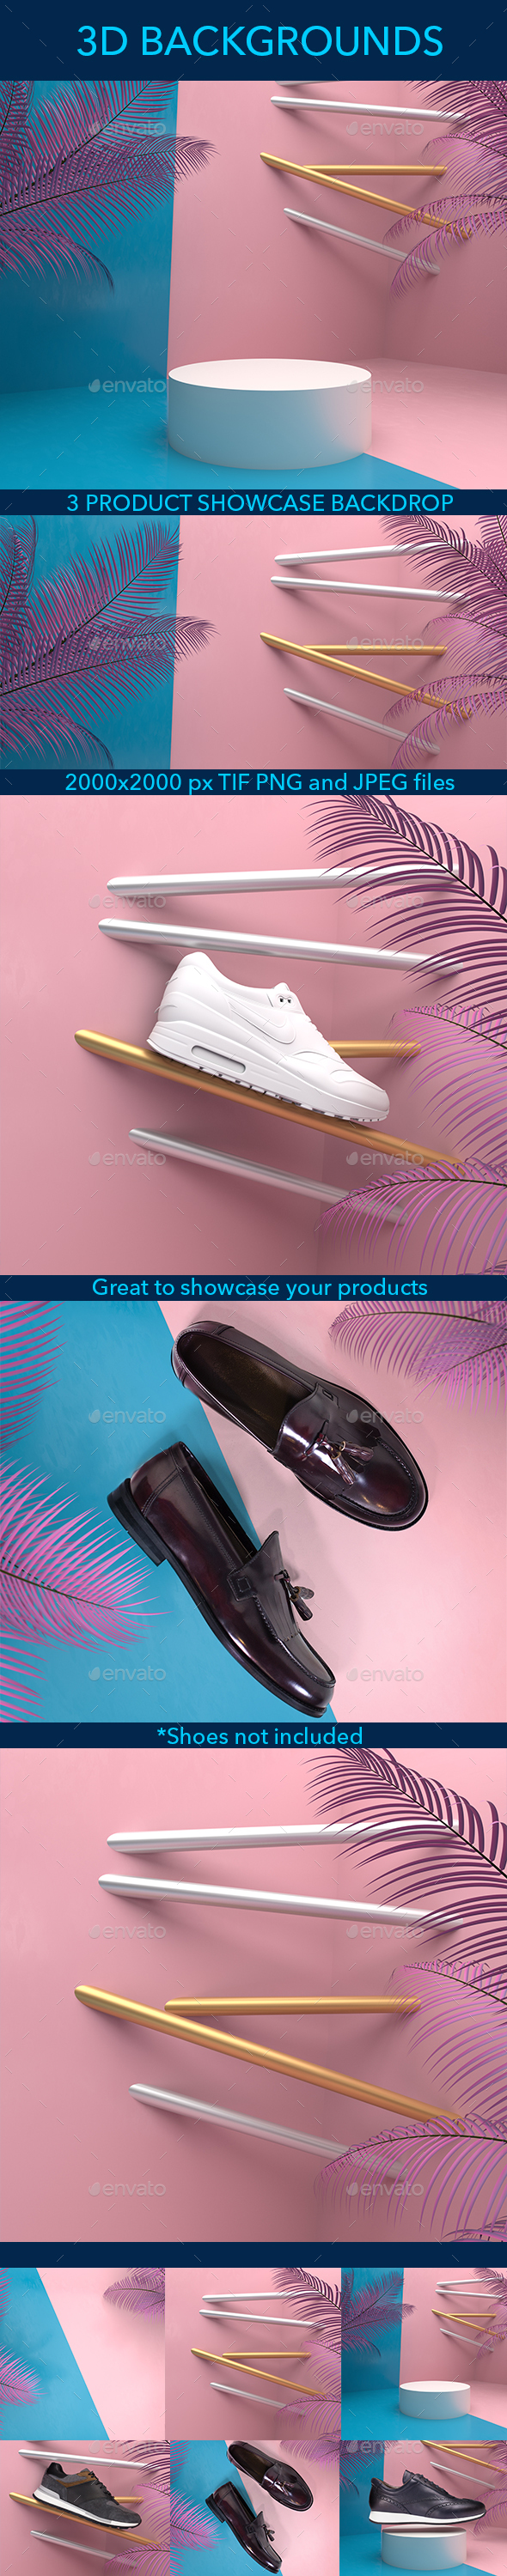 Pink and Blue - 3D Background for Product Showcase